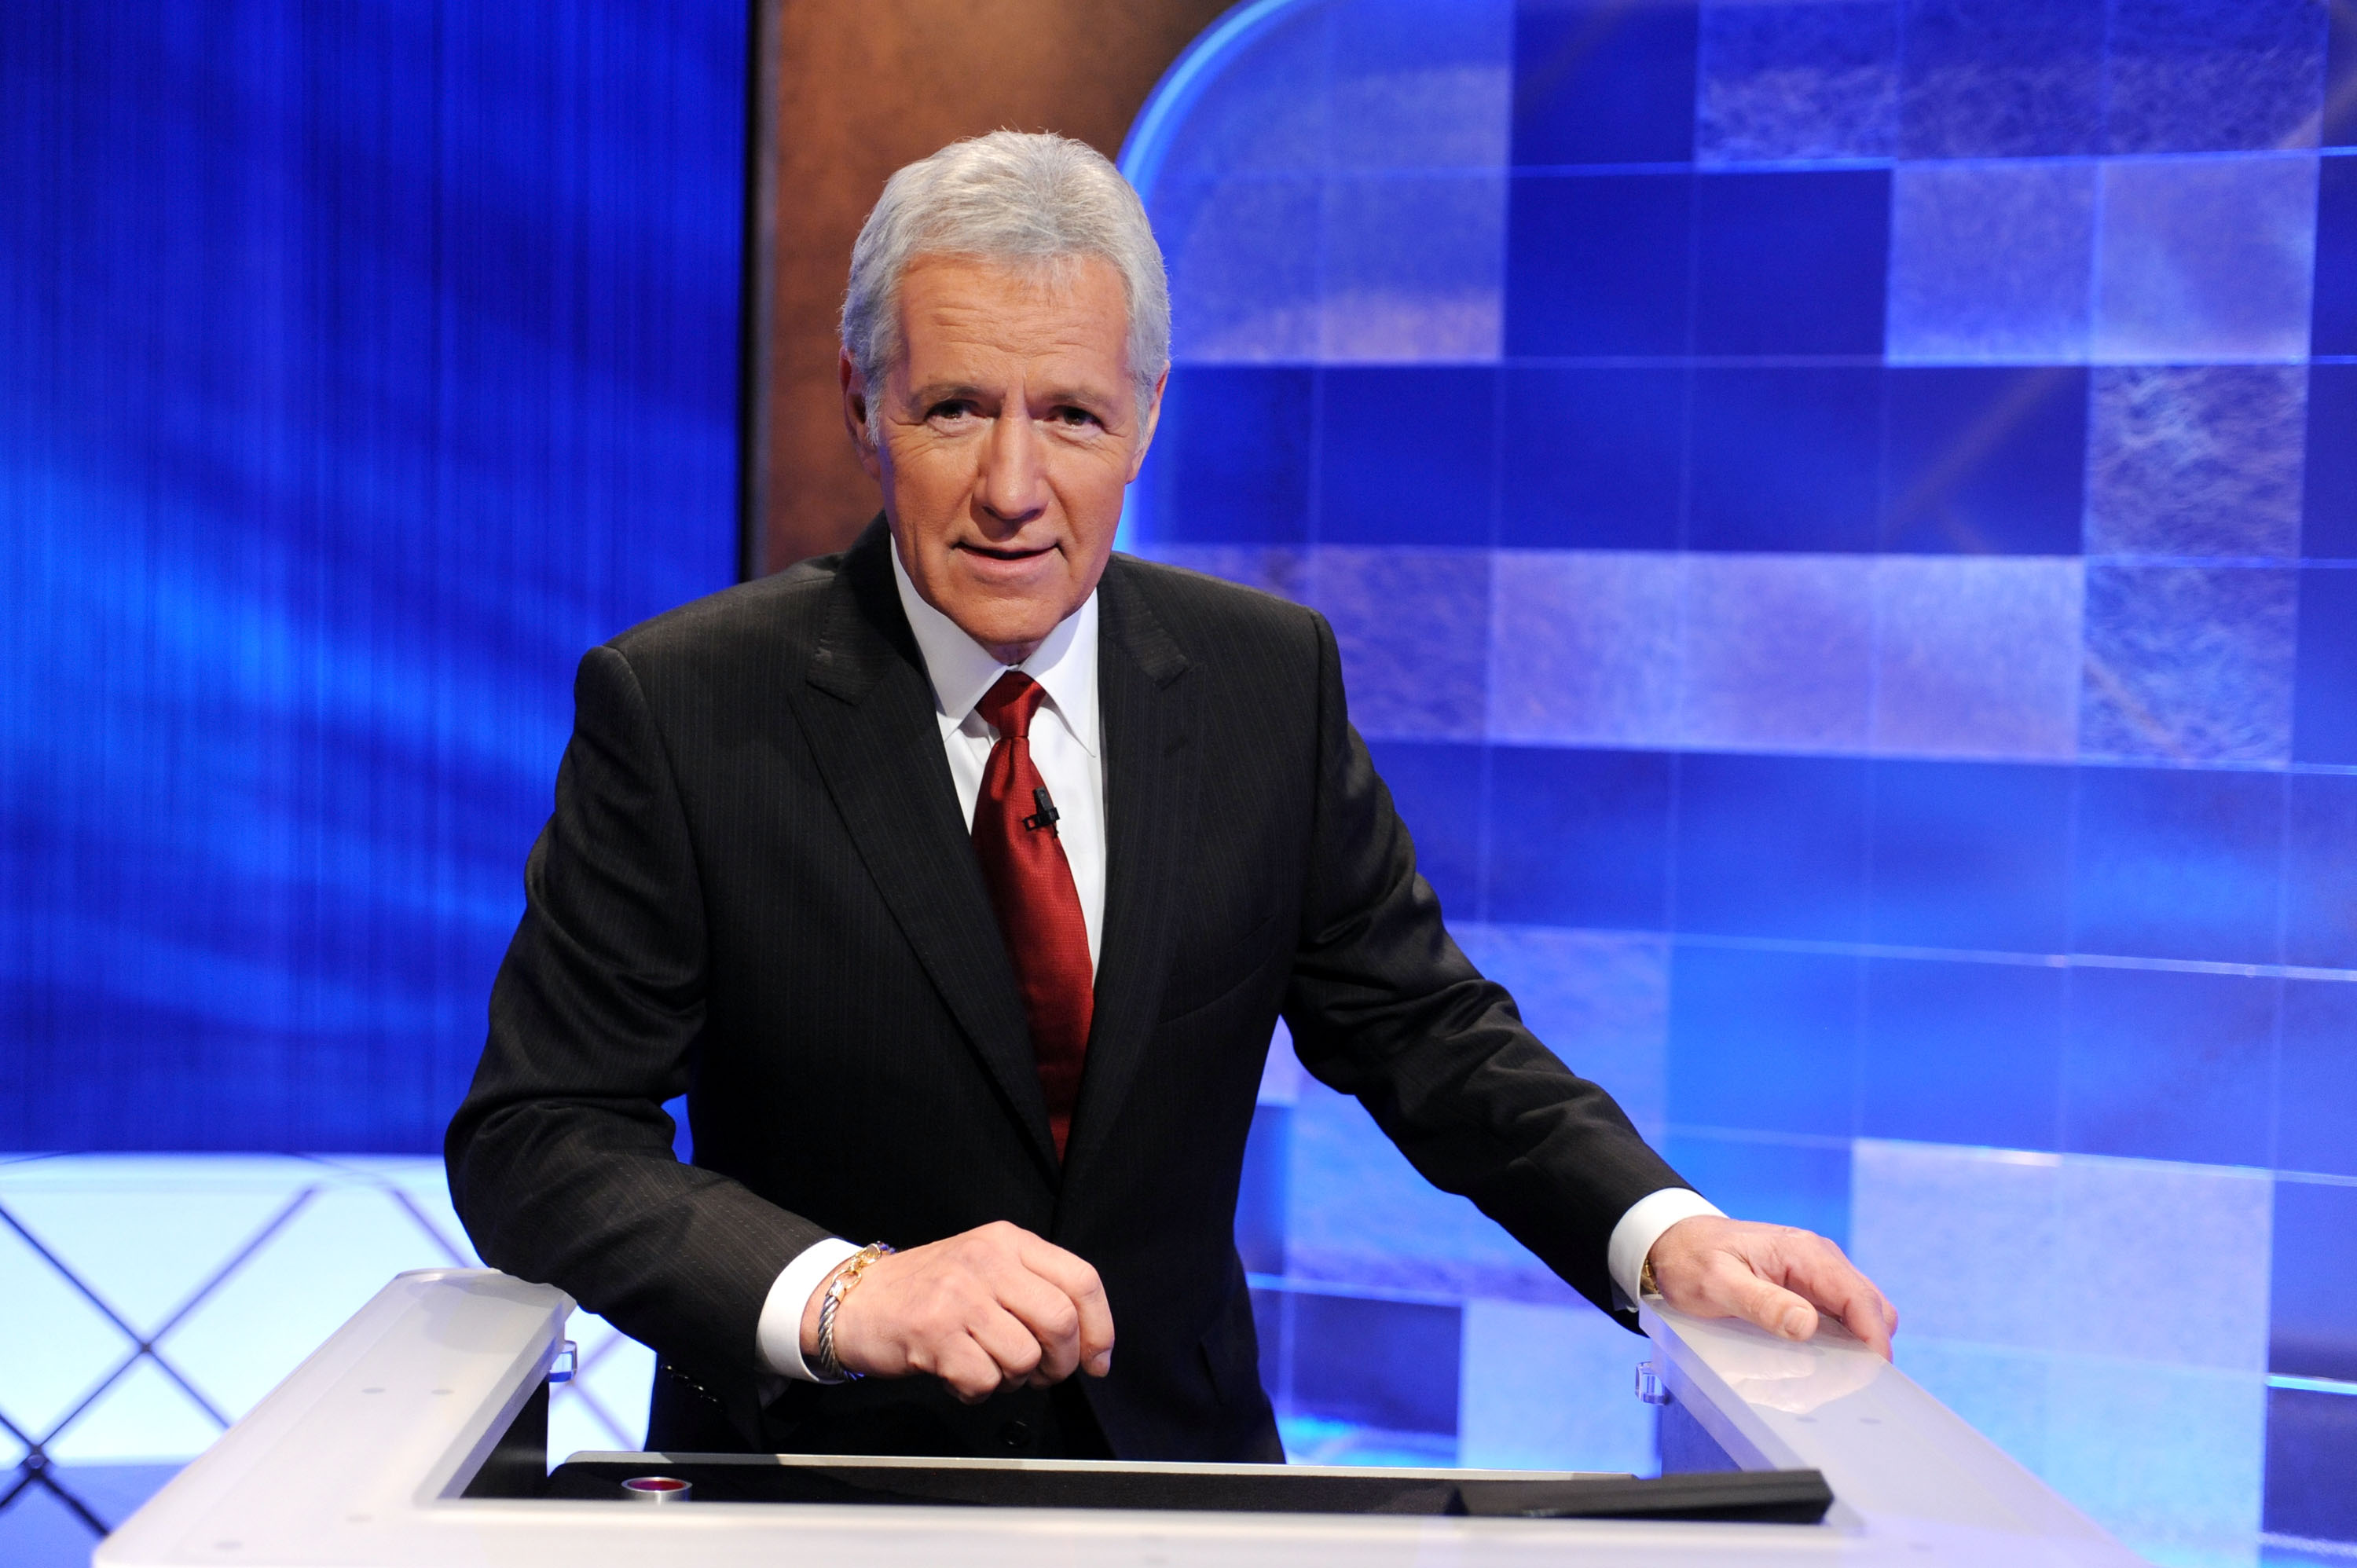 Game show host Alex Trebek poses on the set of the 'Jeopardy!' Million Dollar Celebrity Invitational Tournament Show 